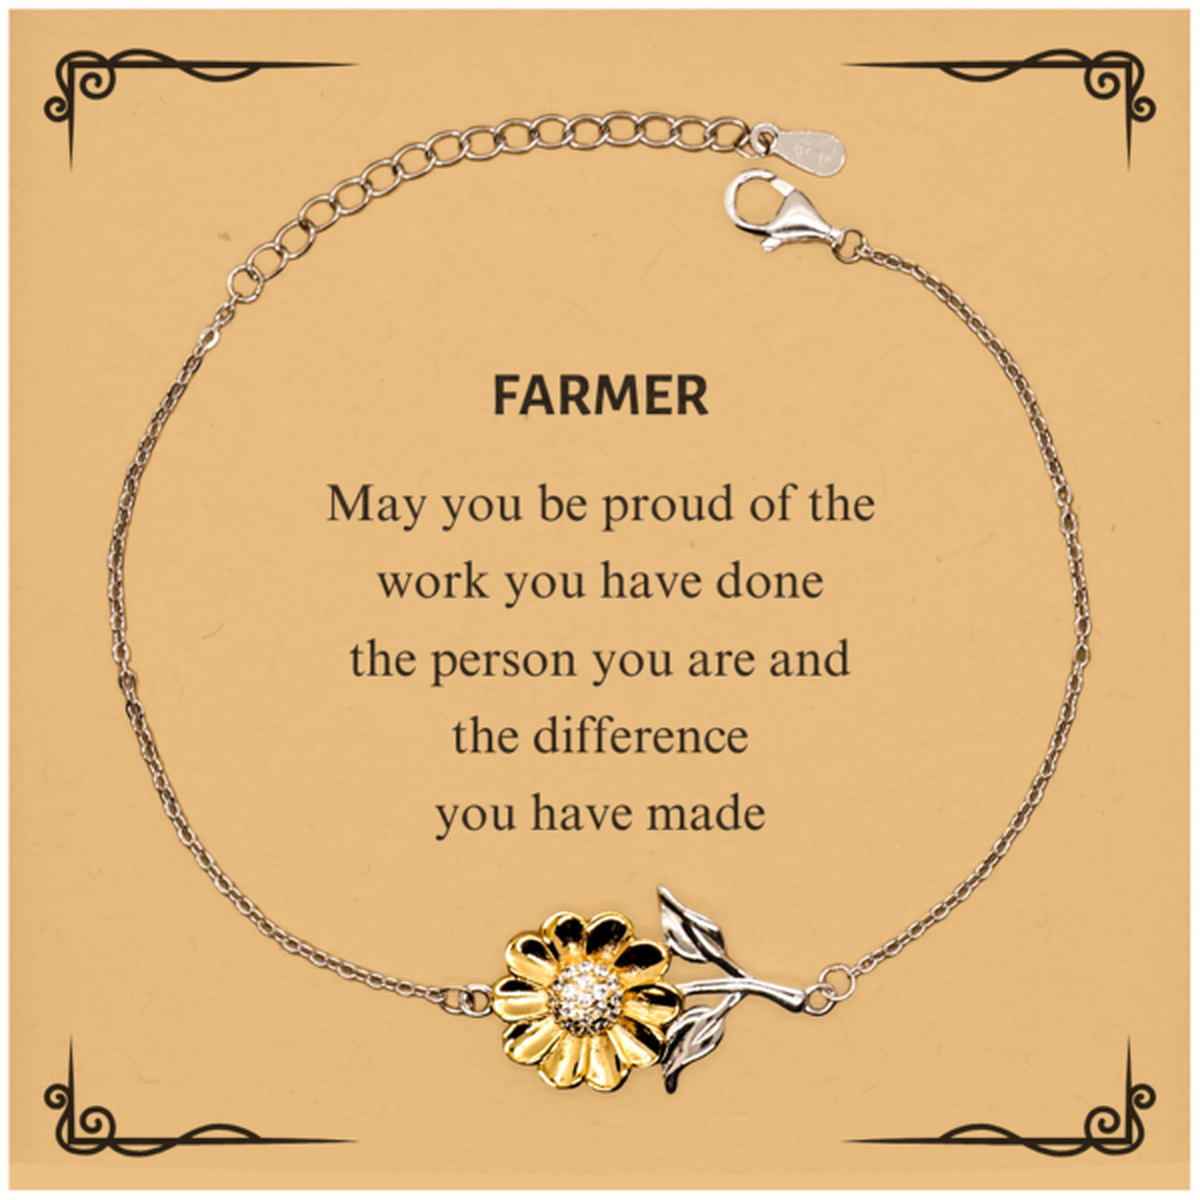 Farmer May you be proud of the work you have done, Retirement Farmer Sunflower Bracelet for Colleague Appreciation Gifts Amazing for Farmer